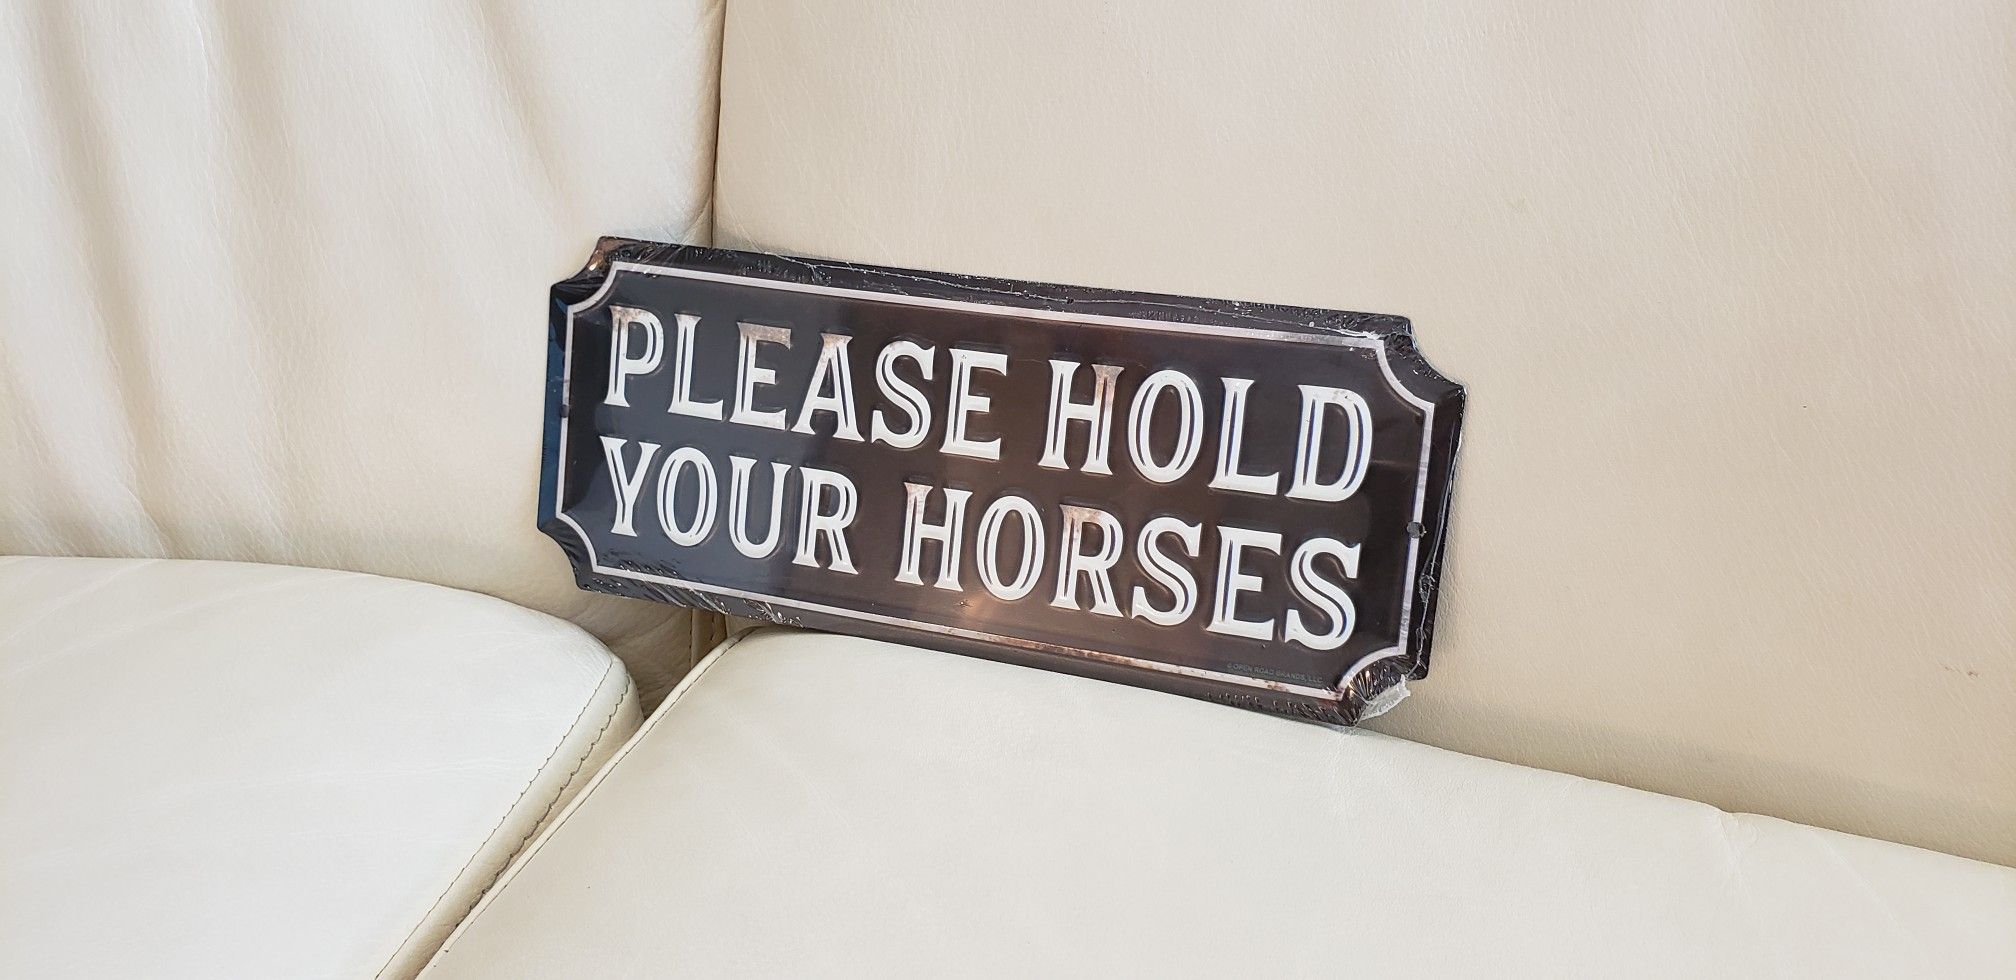 Please hold your horses embossed metal equestrian funny horse riding rodeo barn stall farm backyard decoration. Brown & white measures 10" x 4"